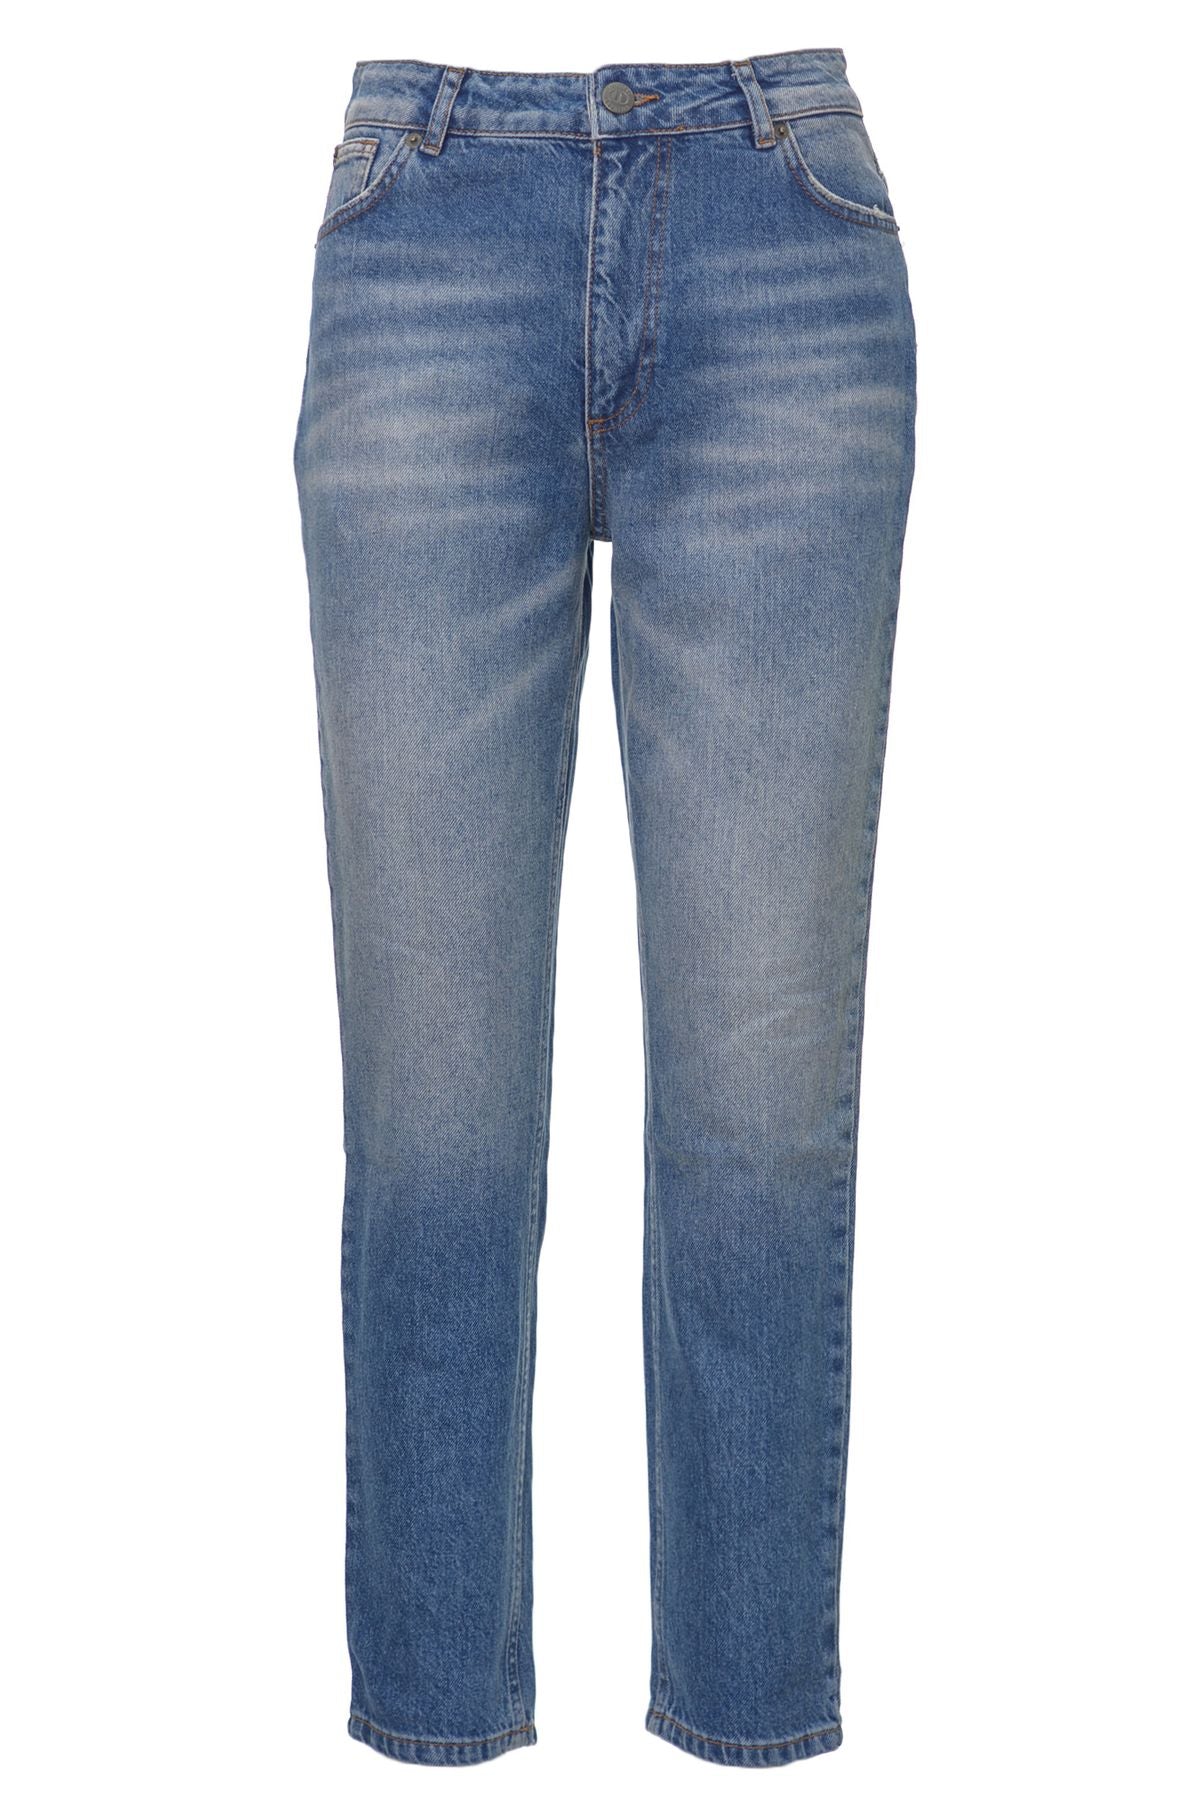 TWIN-SET Spring/Summer Cotton Jeans